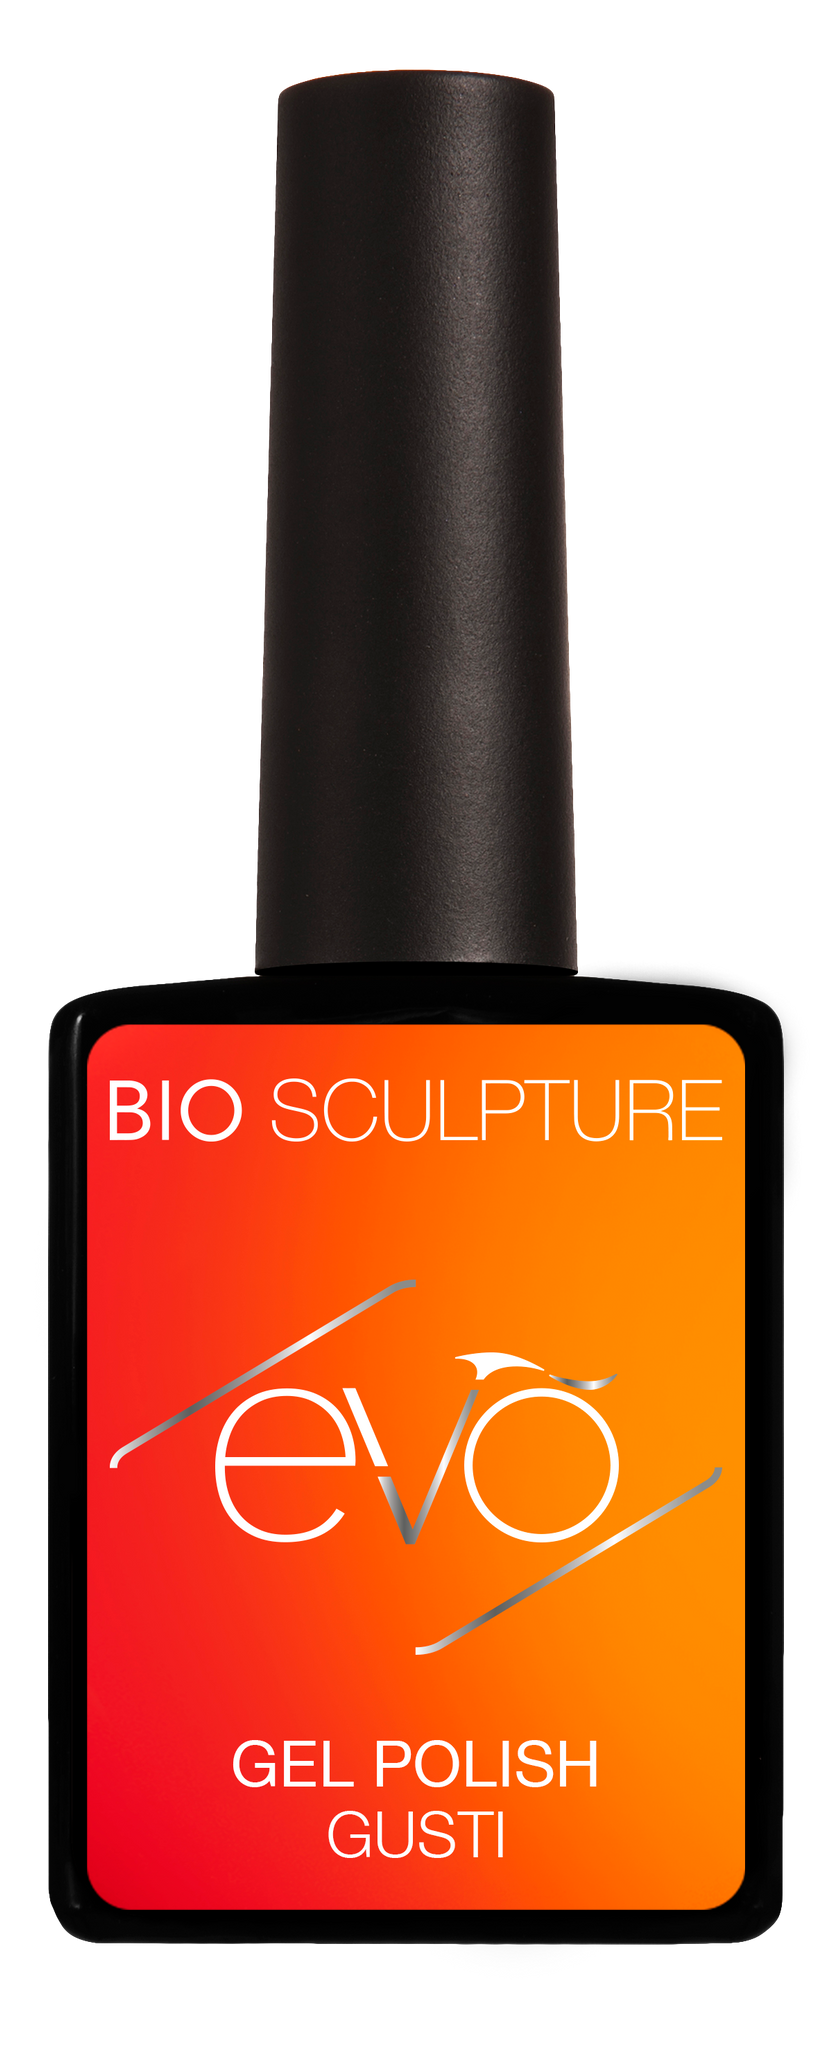 Bio Sculpture Evo launches two new bases – Scratch